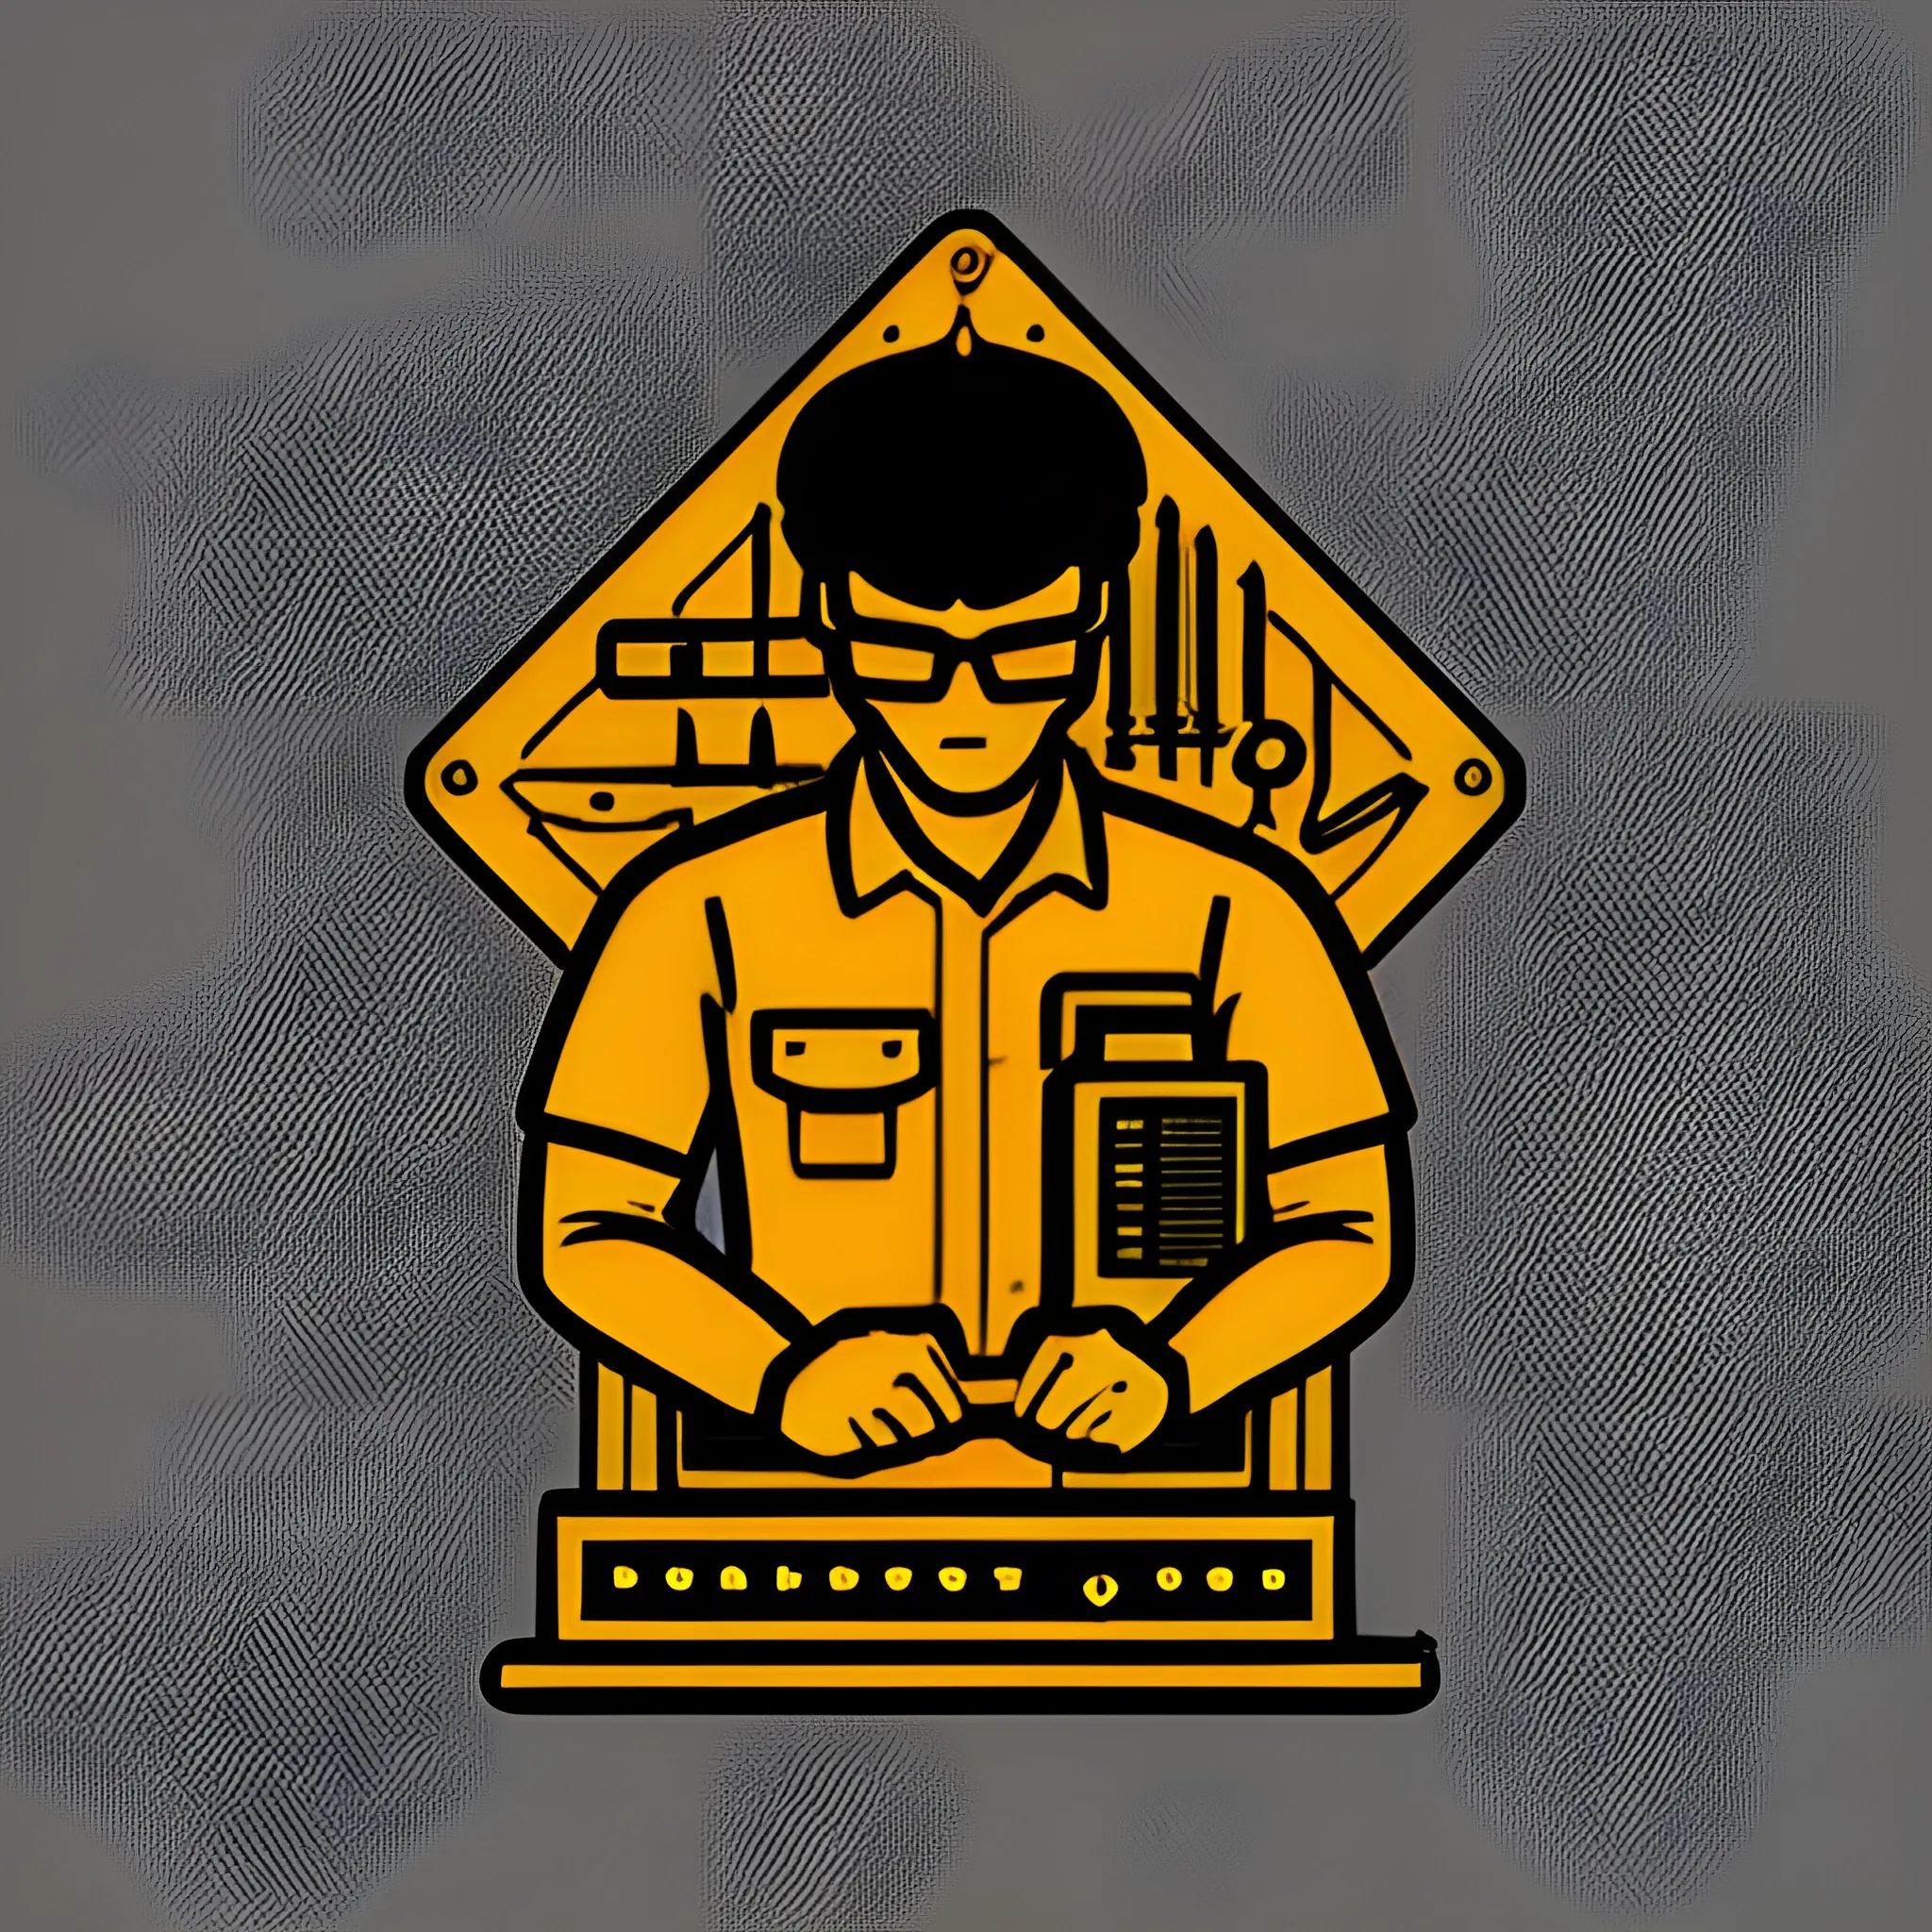 logo, with child,  with tool, computer sadboy

, Trippy